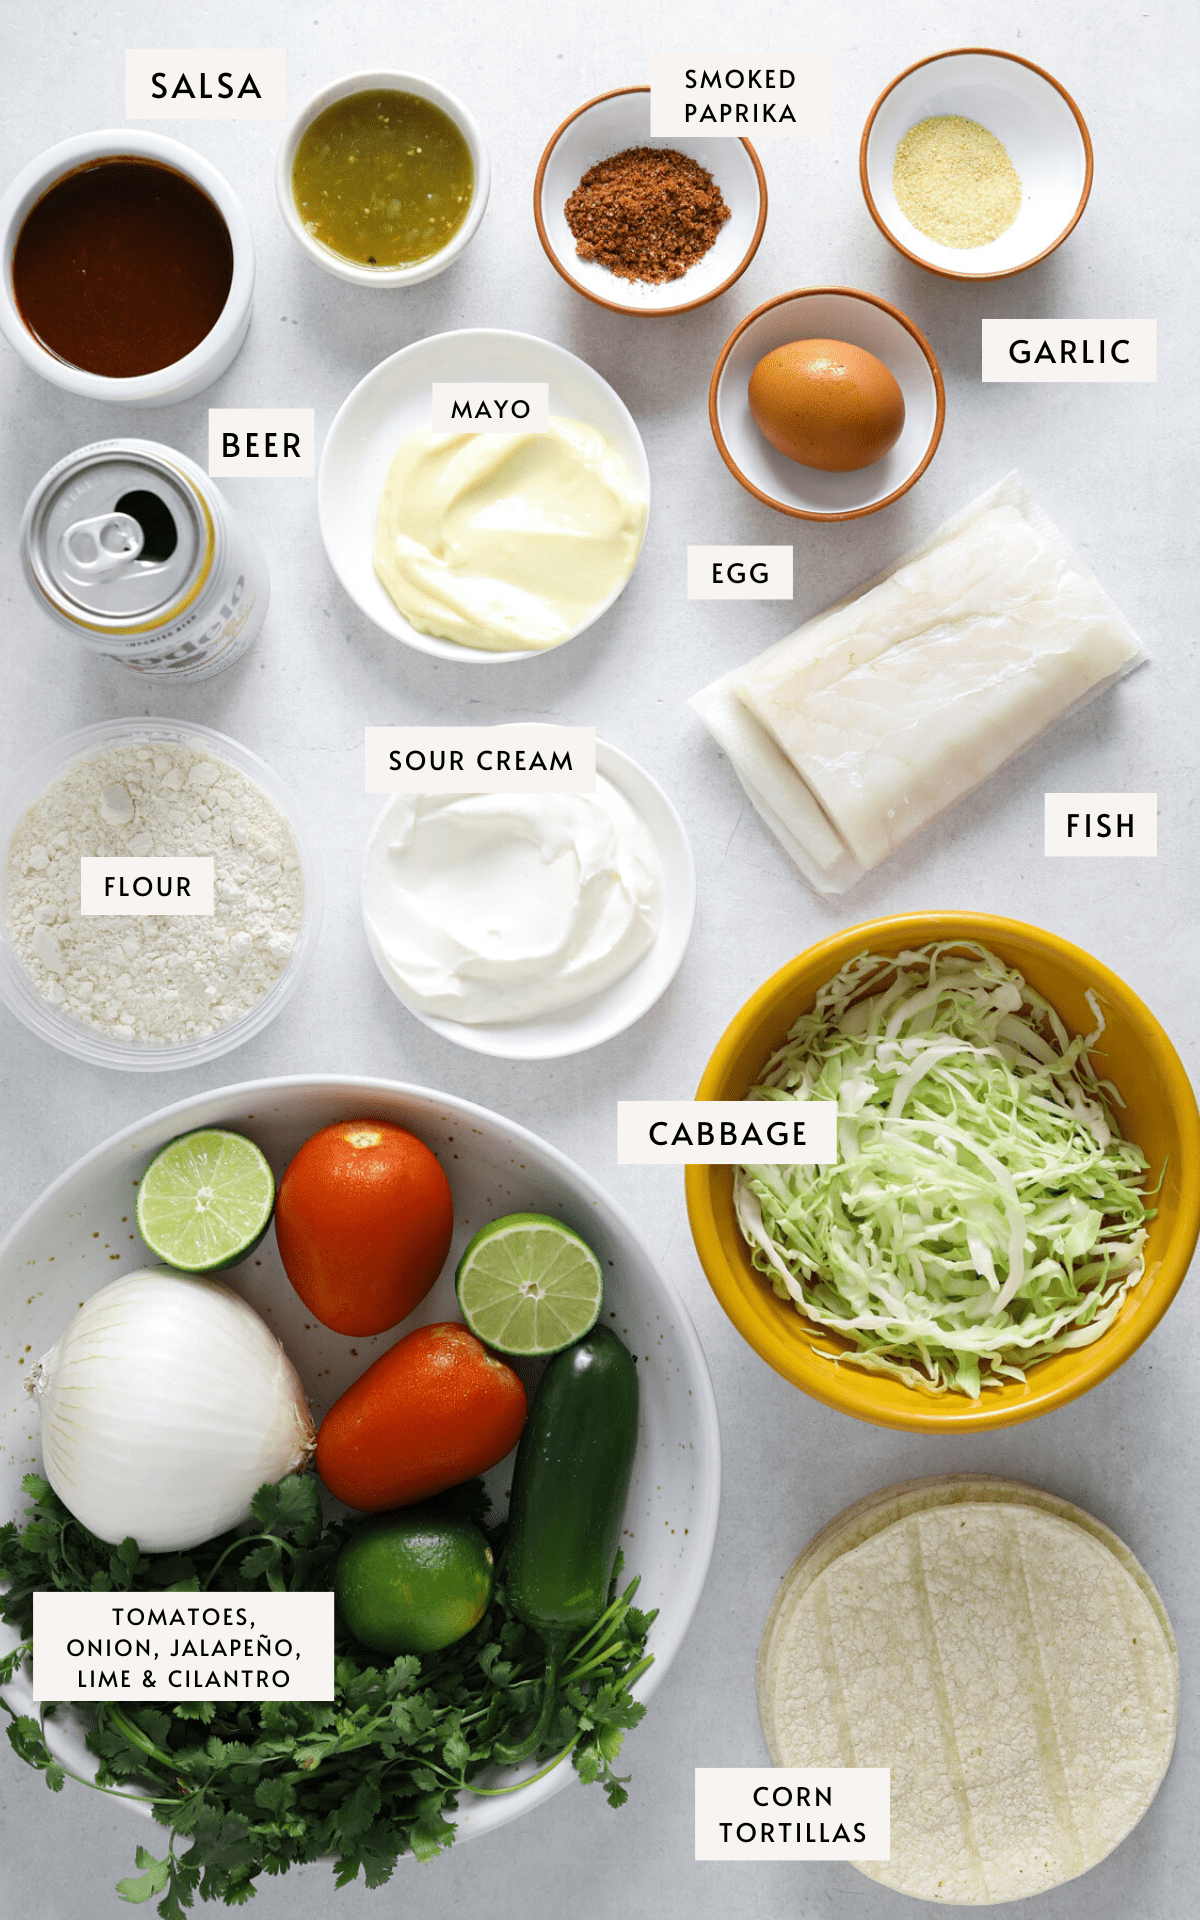 Recipe ingredients portioned into individual bowls; shredded cabbage, a fish filet, flour, sour cream, salsa, limes, a stack of corn tortillas.